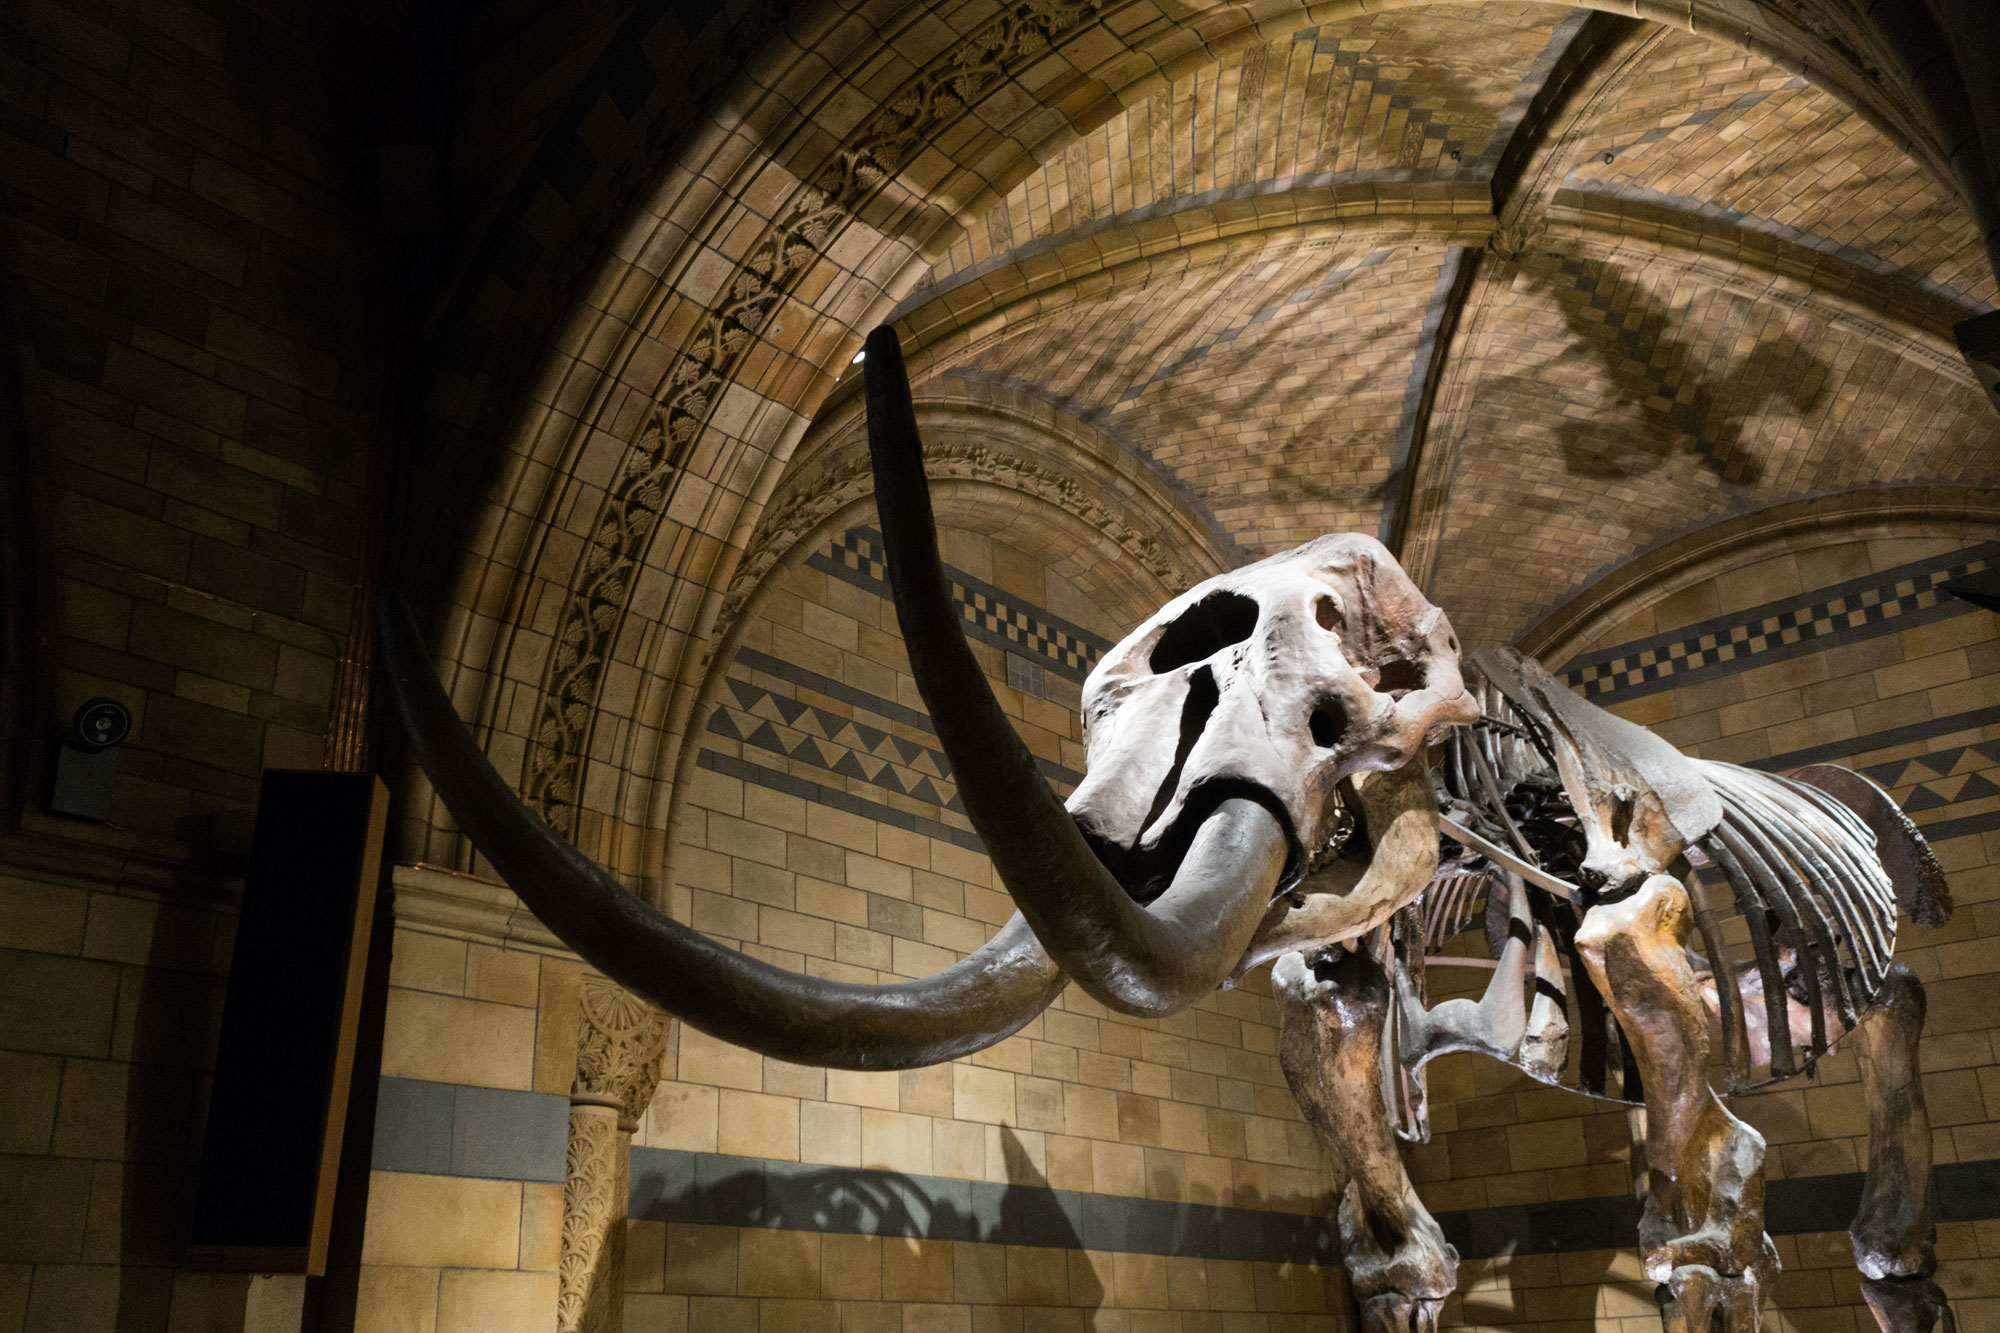 Photograph of the mounted skeleton of the Missouri Leviathon mastodon on display at the British Museum in 2017.